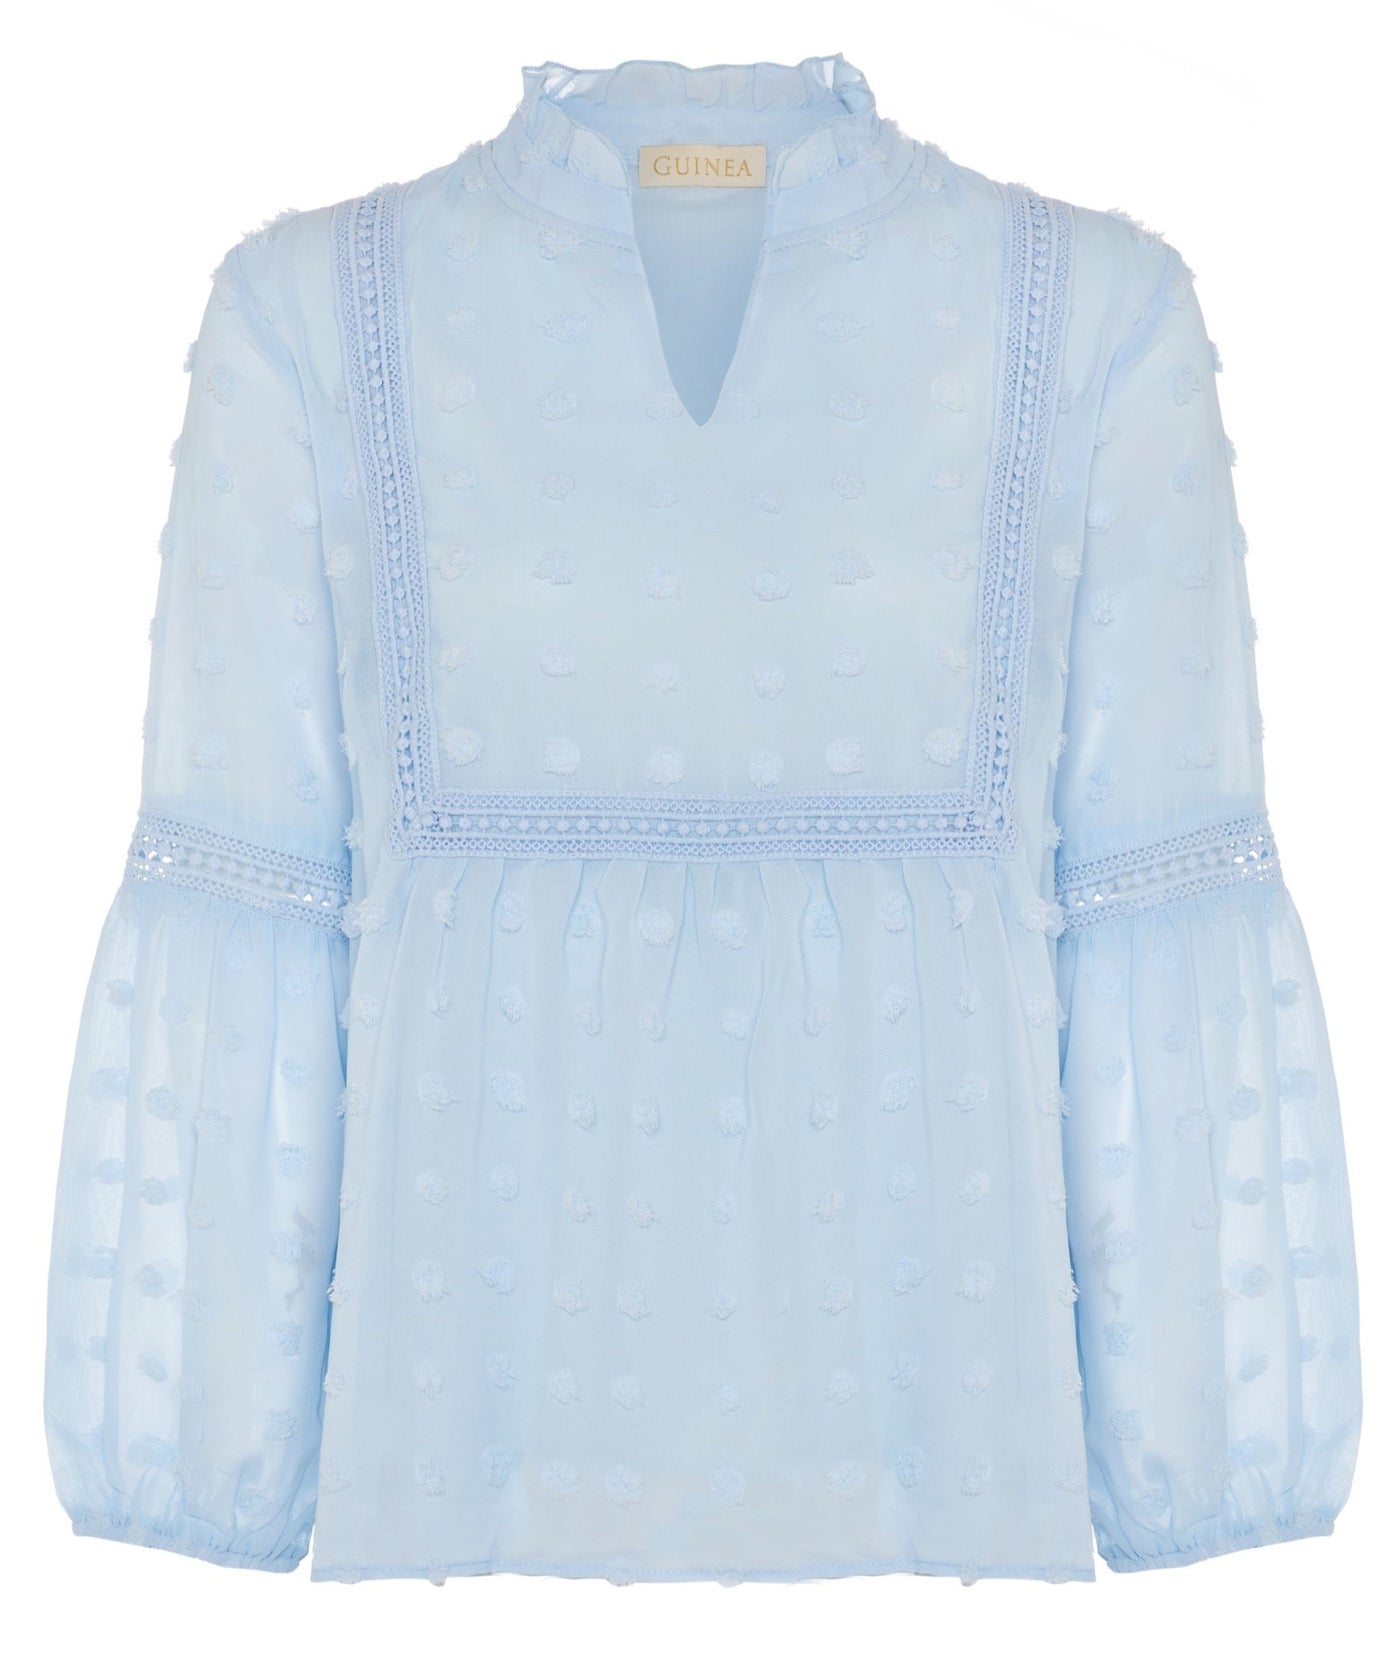 Mia - Long Sleeved Summer Top - Pale Blue